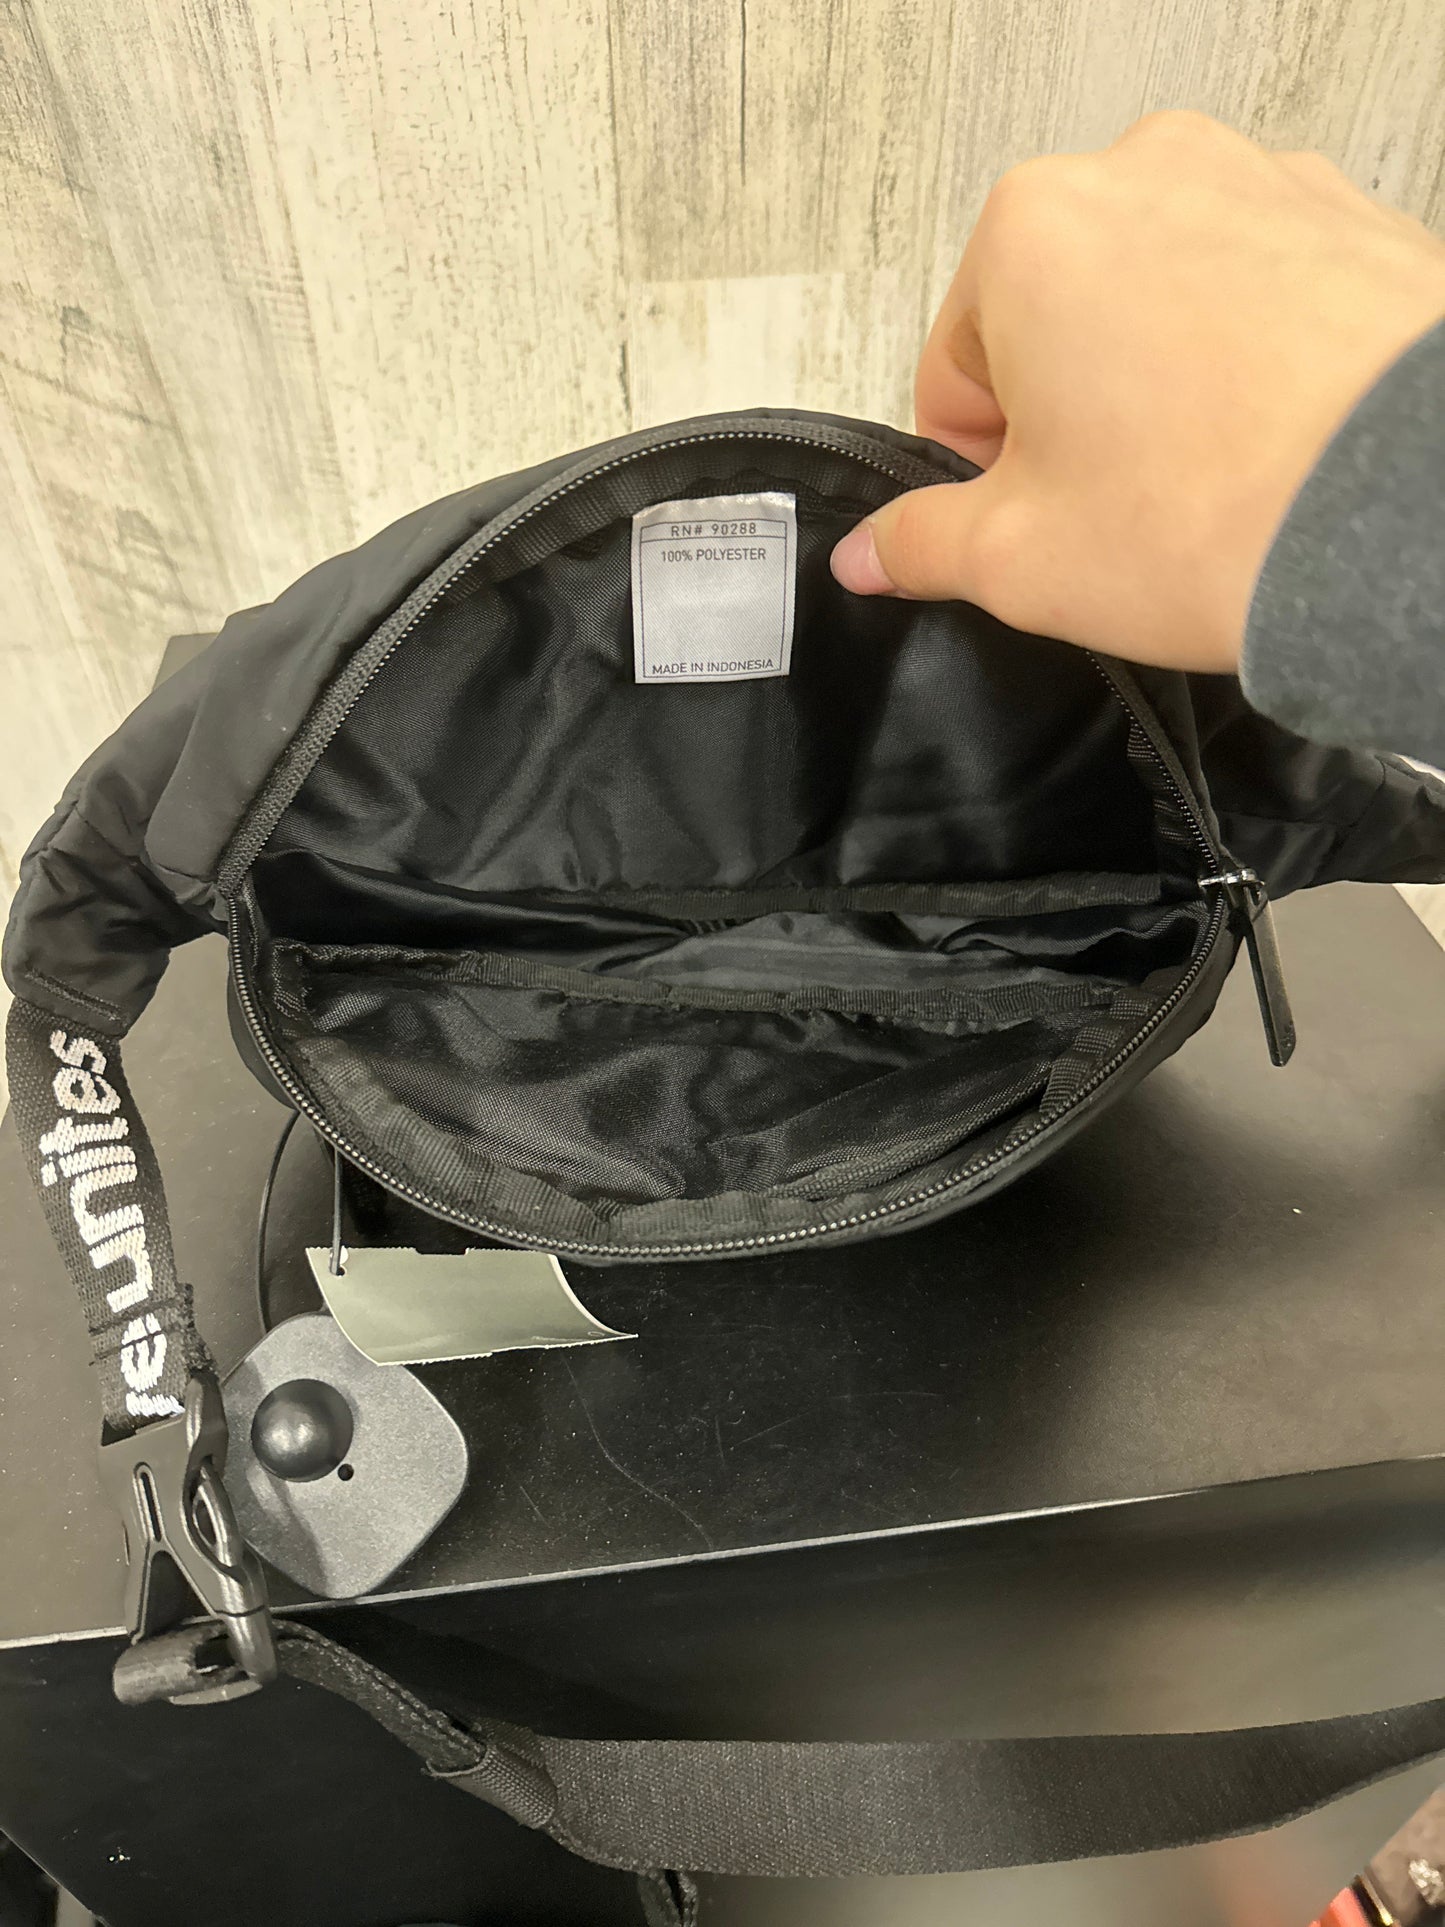 Belt Bag By Adidas  Size: Small